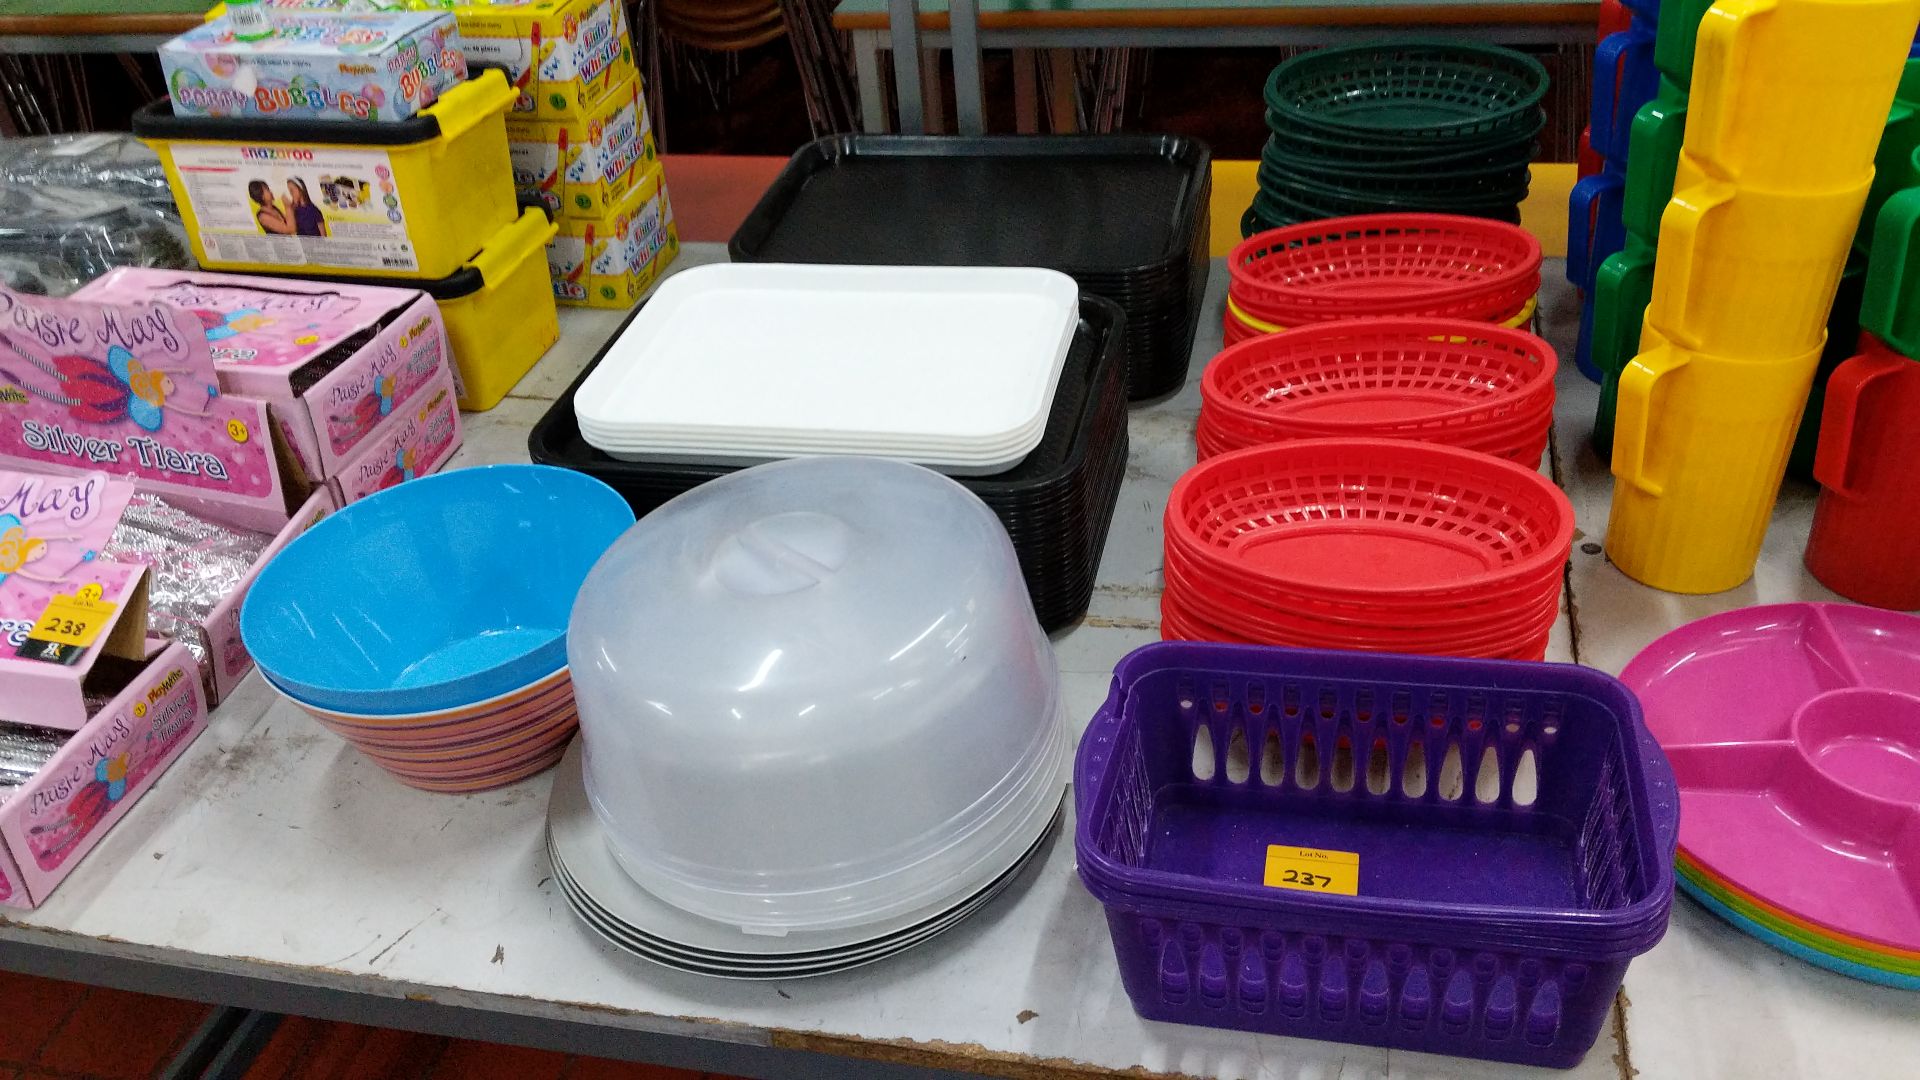 Double row of plastic trays, baskets & cloches Lots 80 - 95 & 168 - 249 consist of café furniture,